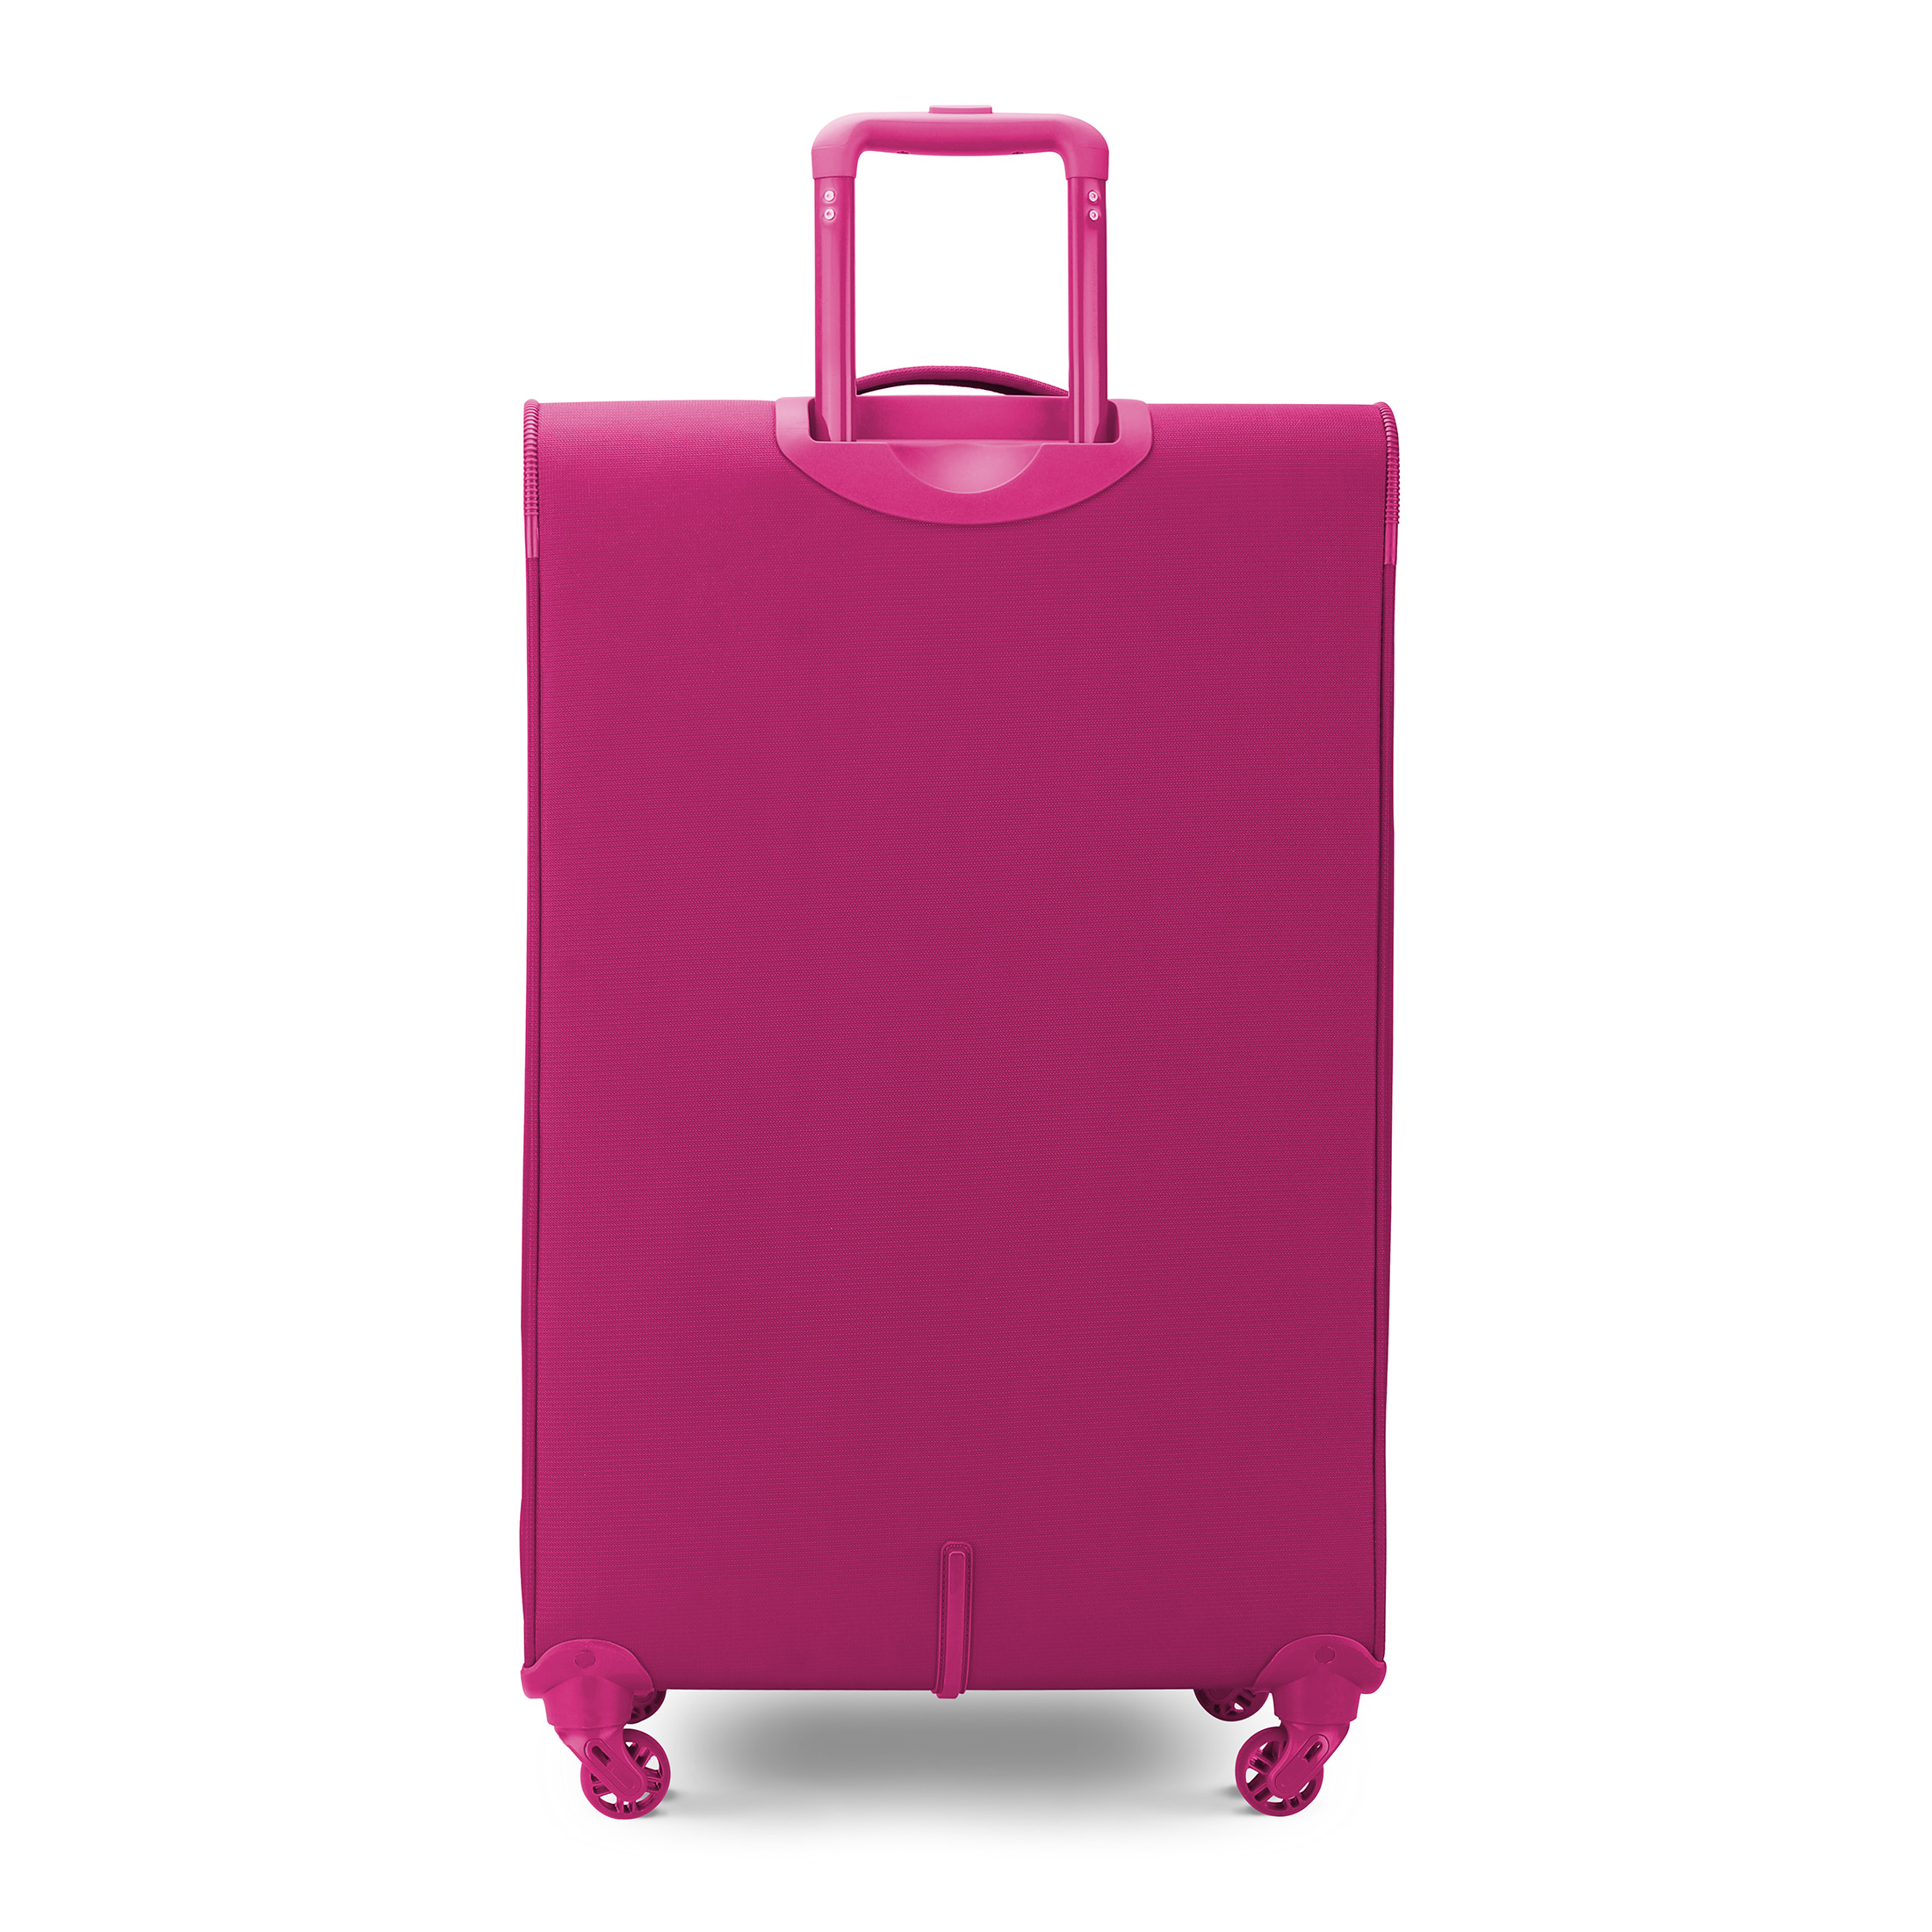 iFLY Softside Passion 24" Checked Luggage, Fuchsia - image 5 of 8